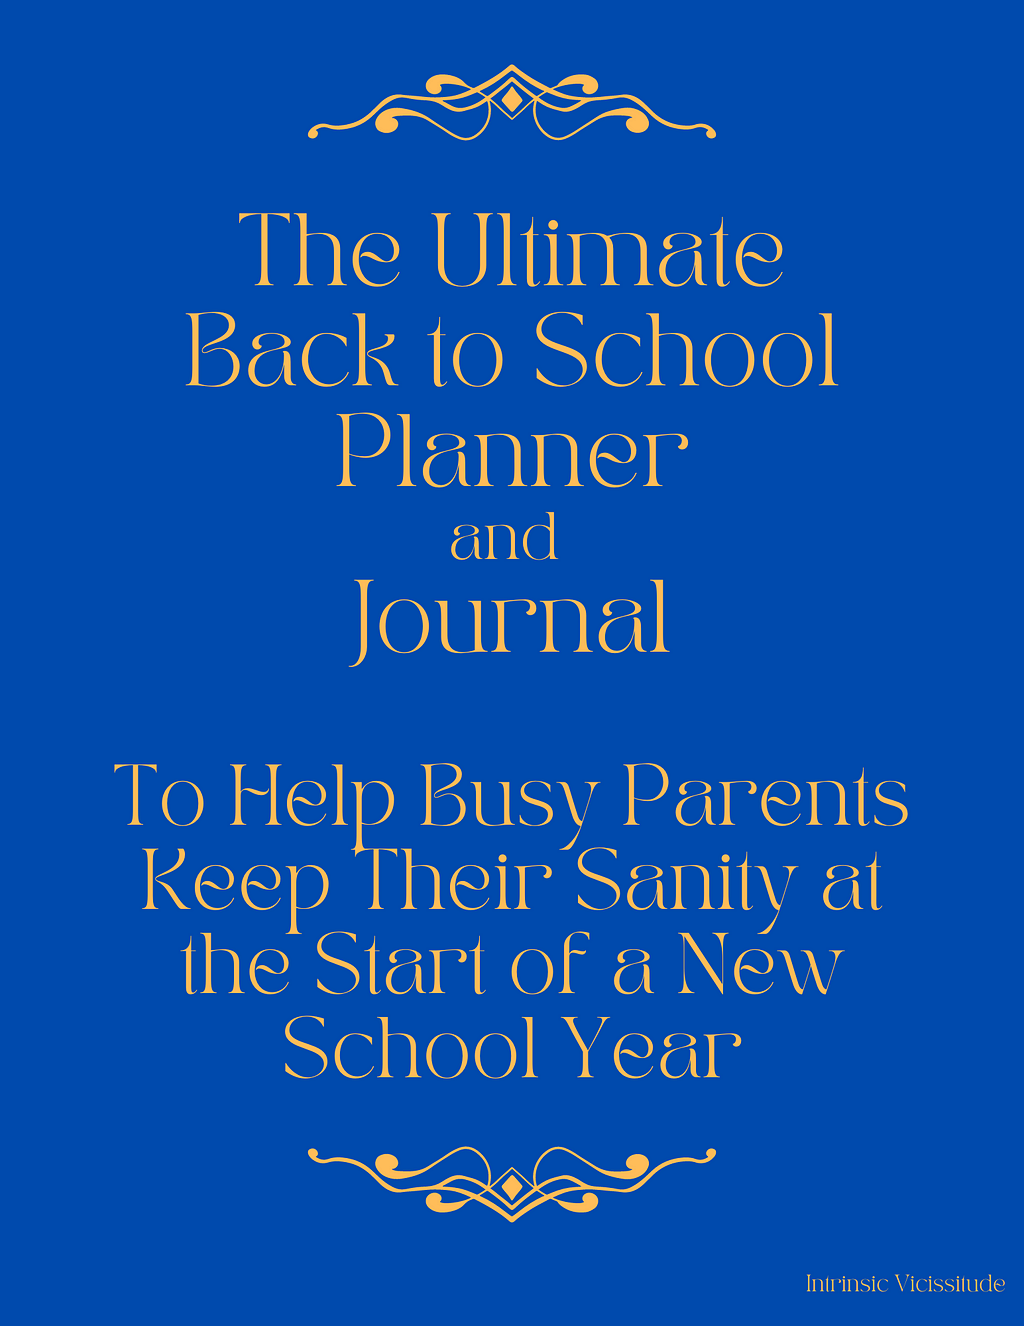 Blue and Gold cover of the Back to School Planner and Journal to help busy parents keep their sanity at the start of a new school year.